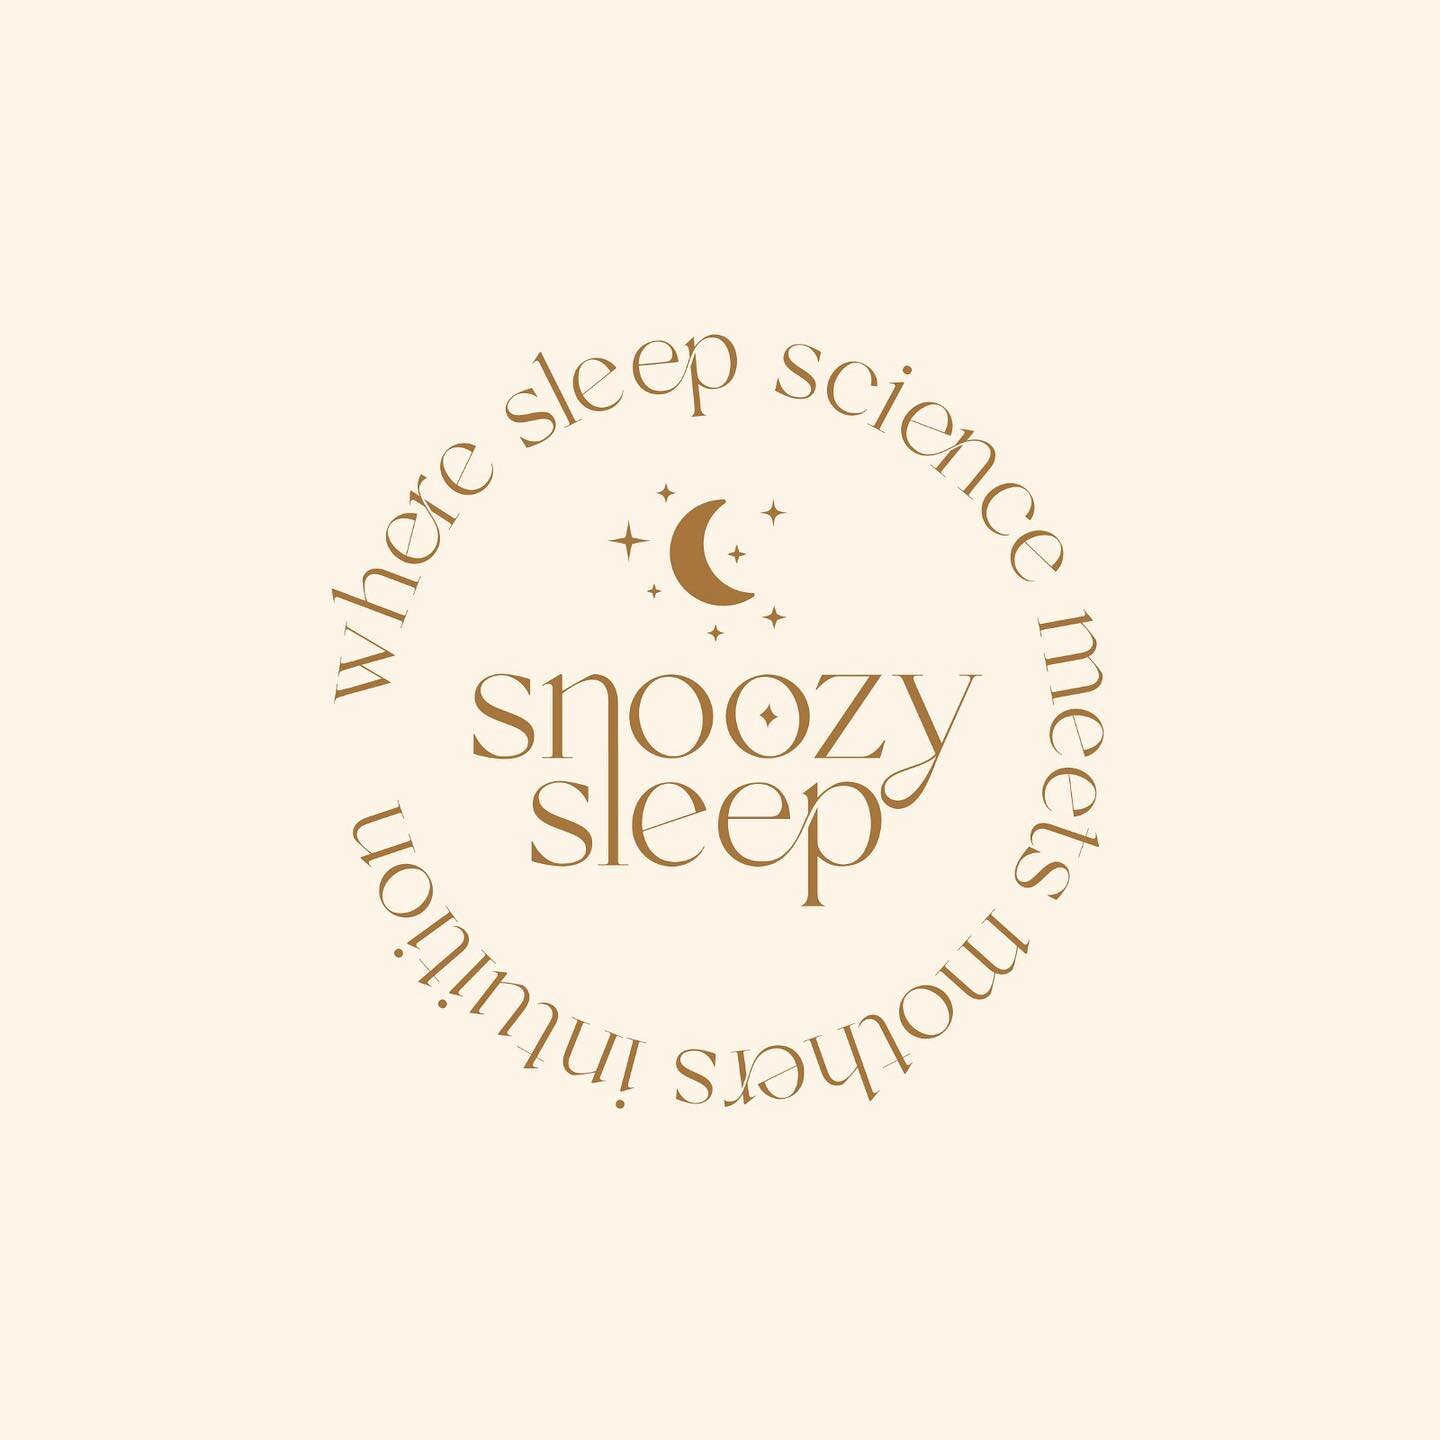 The immense joy I have of introducing the total re brand and new website for Snoozy Sleep (link in bio, go have a look around!). ⁣
⁣
The years of sacrifice and hard work to be in a position to be able to work with an amazing design agency who have be